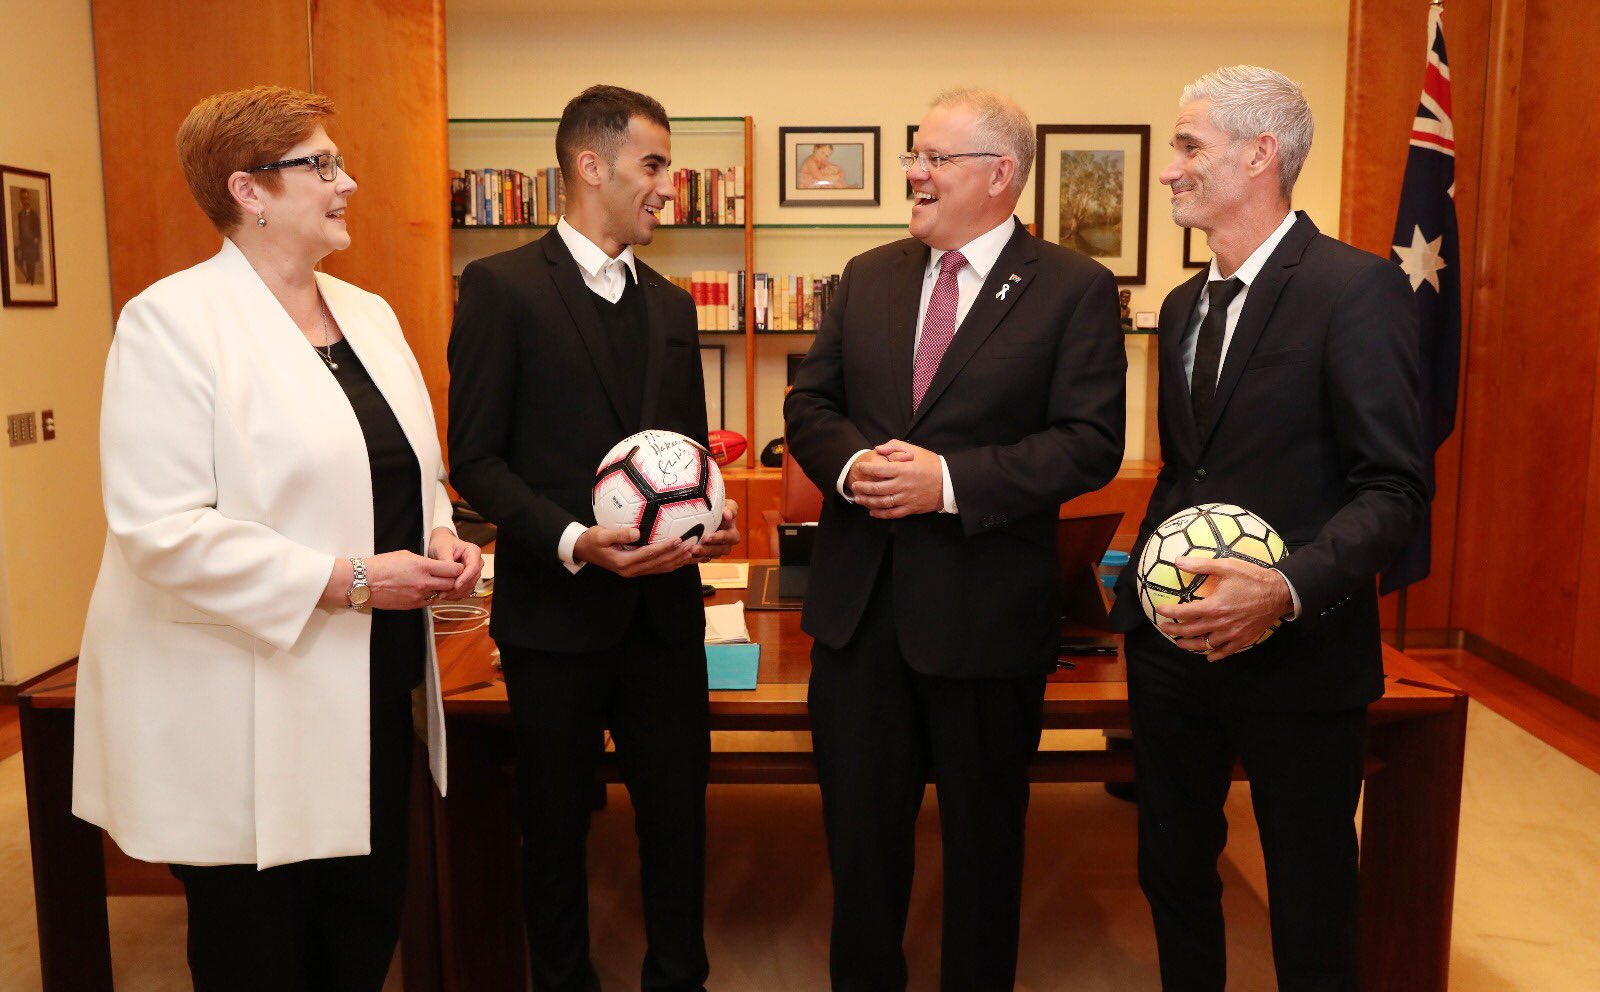 Hakeem al-Araibi meets with the Prime Minister, Foreign Minister and Craig Foster at Parliament House, Image source: Prime Minister Scott Morrison, @ScottMorrisonMP on Twitter